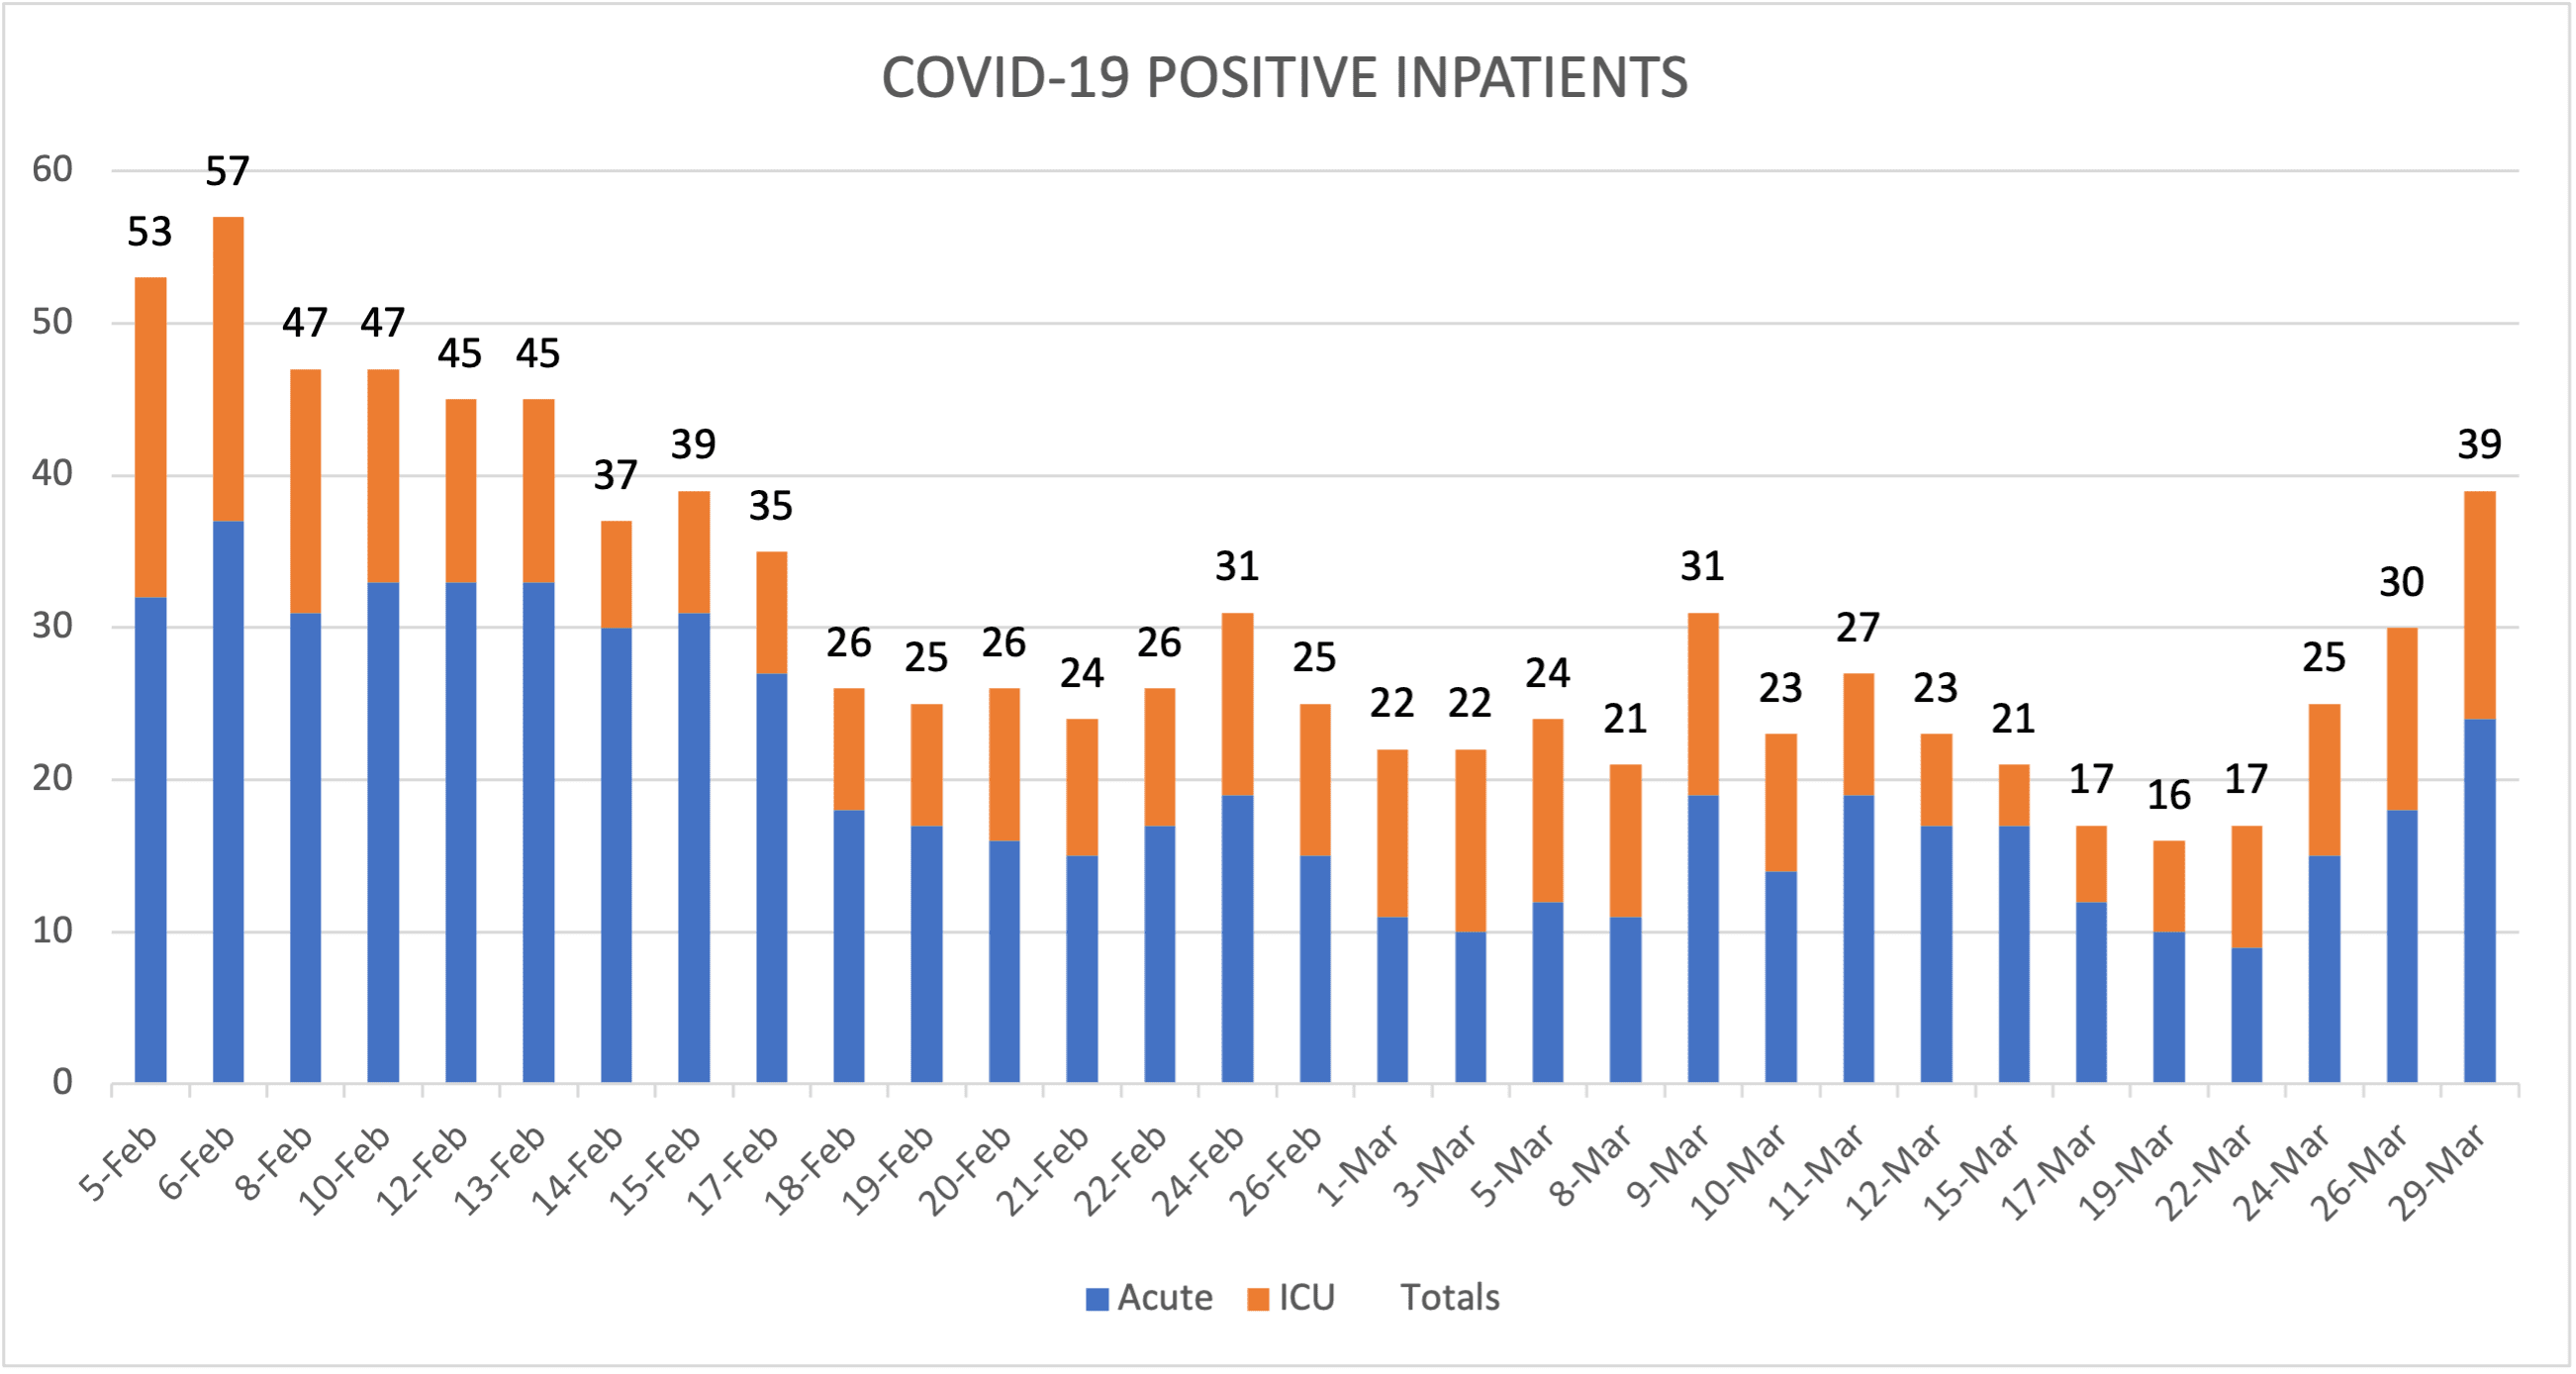 COVID-19 Positive Inpatients March 29 2021